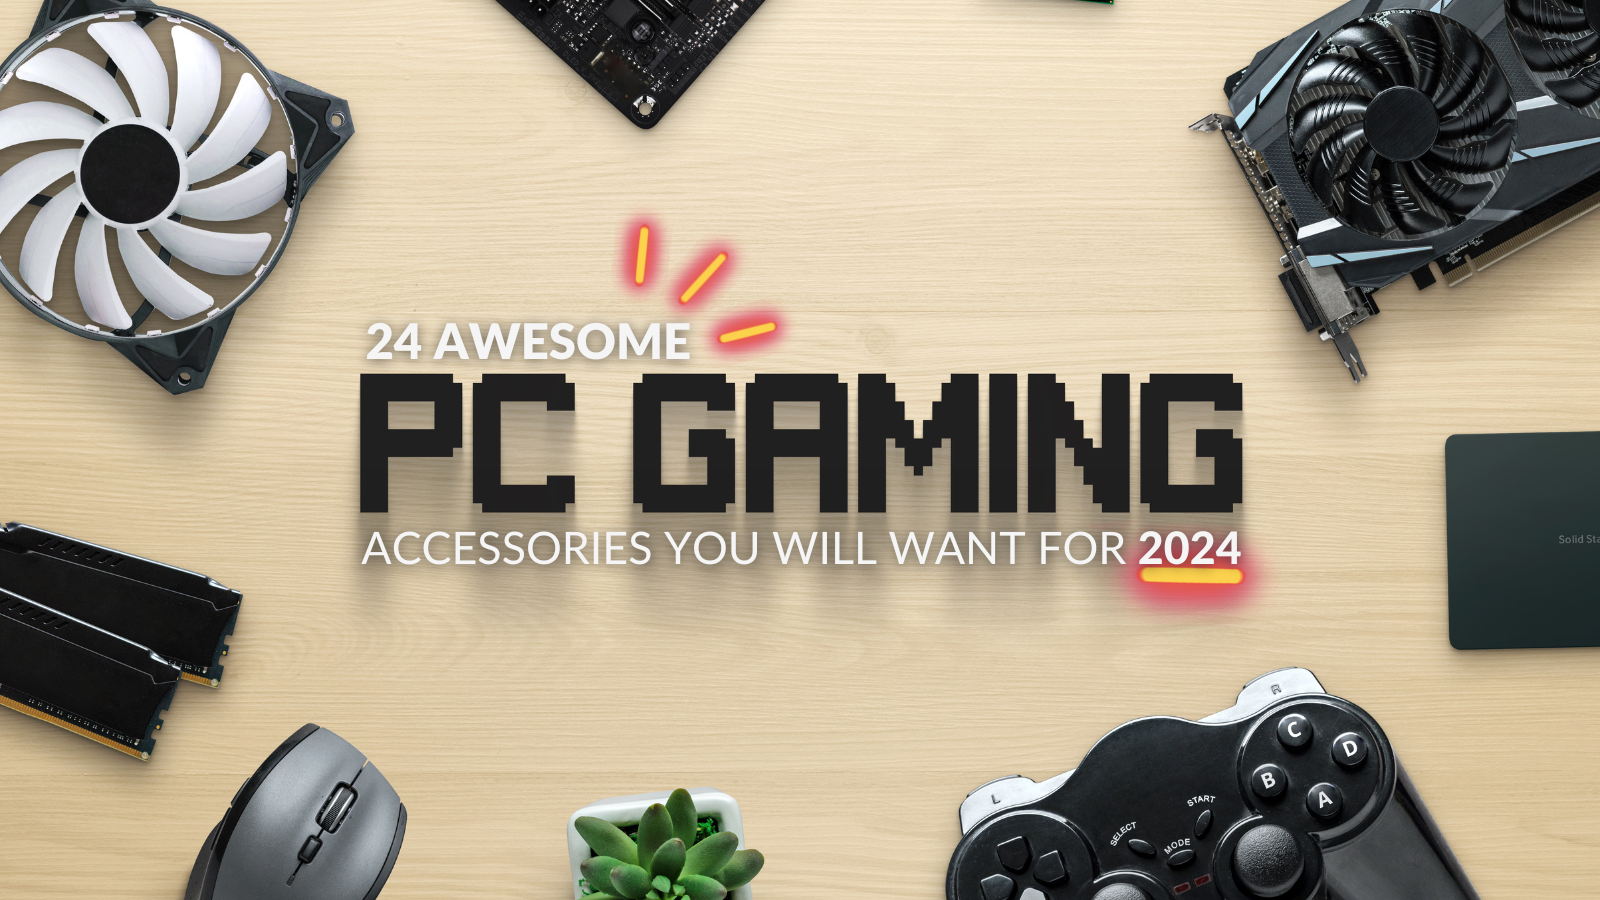 24 Awesome PC Gaming Accessories You Will Want For 2024